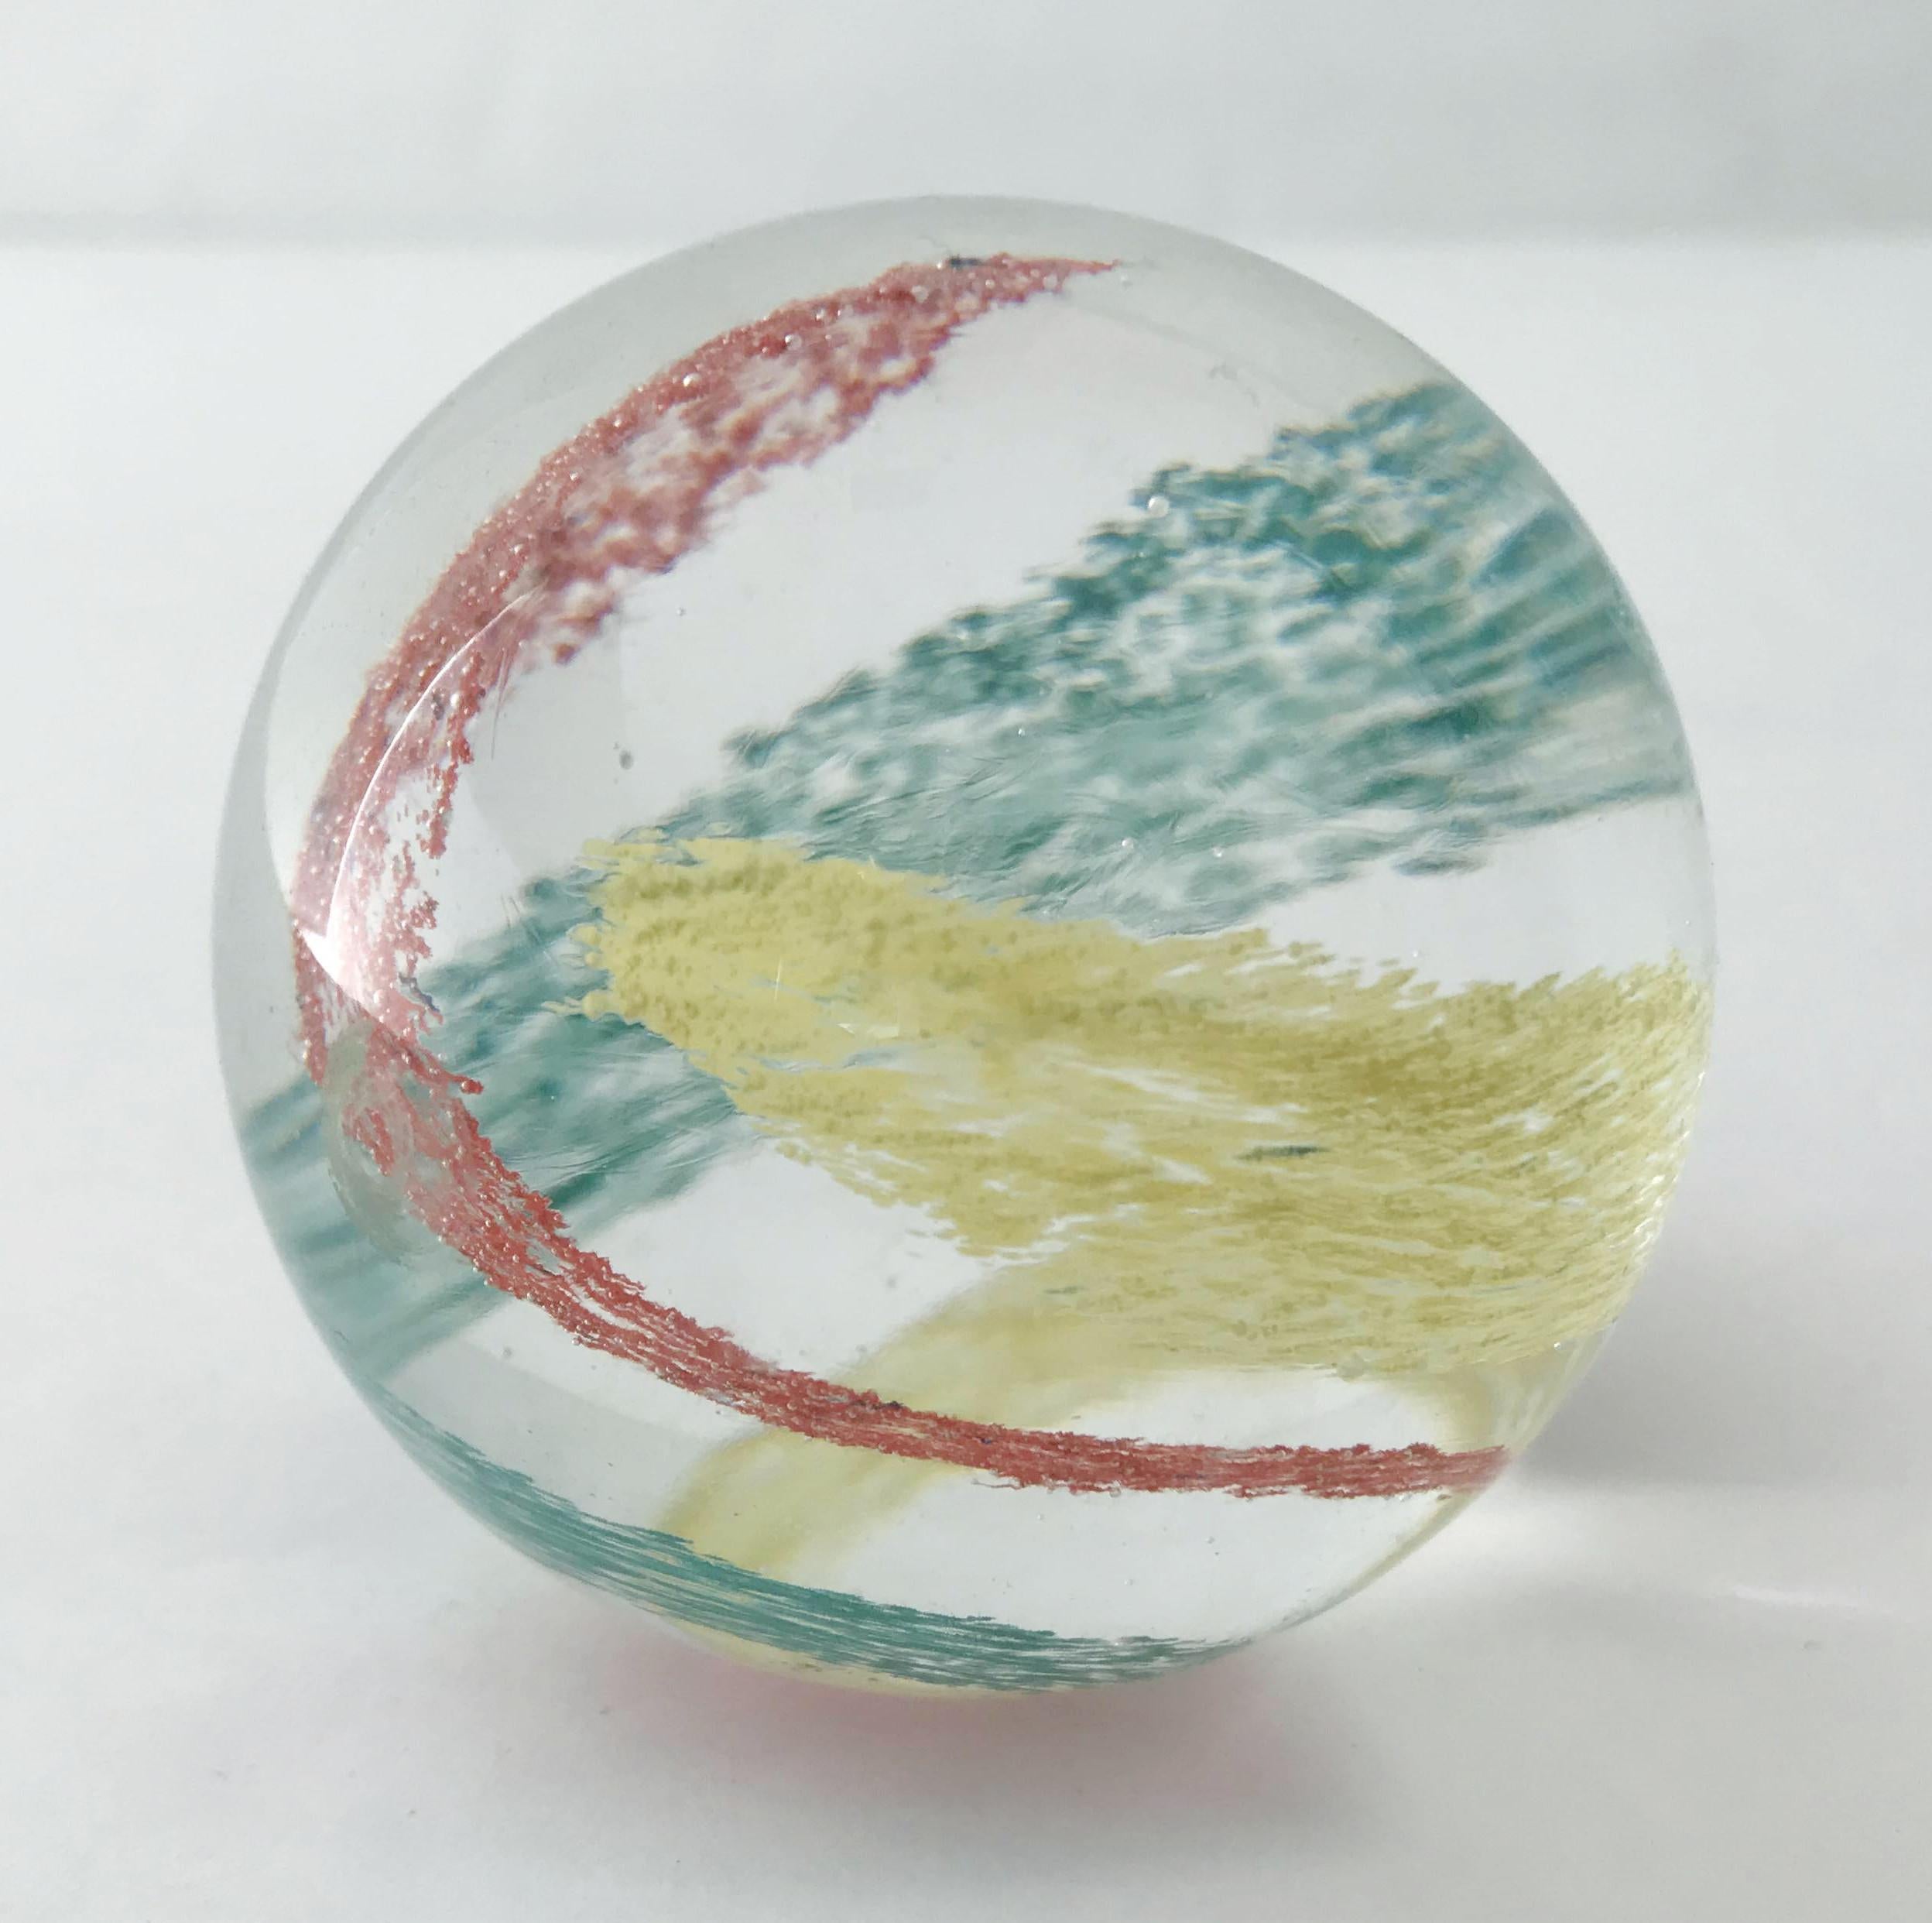 Vintage Italian Murano glass paperweight hand blown with red, green, and yellow swirl pattern / made in Italy, circa 1960s
Measures: Diameter 2.5 inches, height 2.5 inches
1 in stock in Palm Springs ON 50% OFF SALE for $199 !
Please note the minor